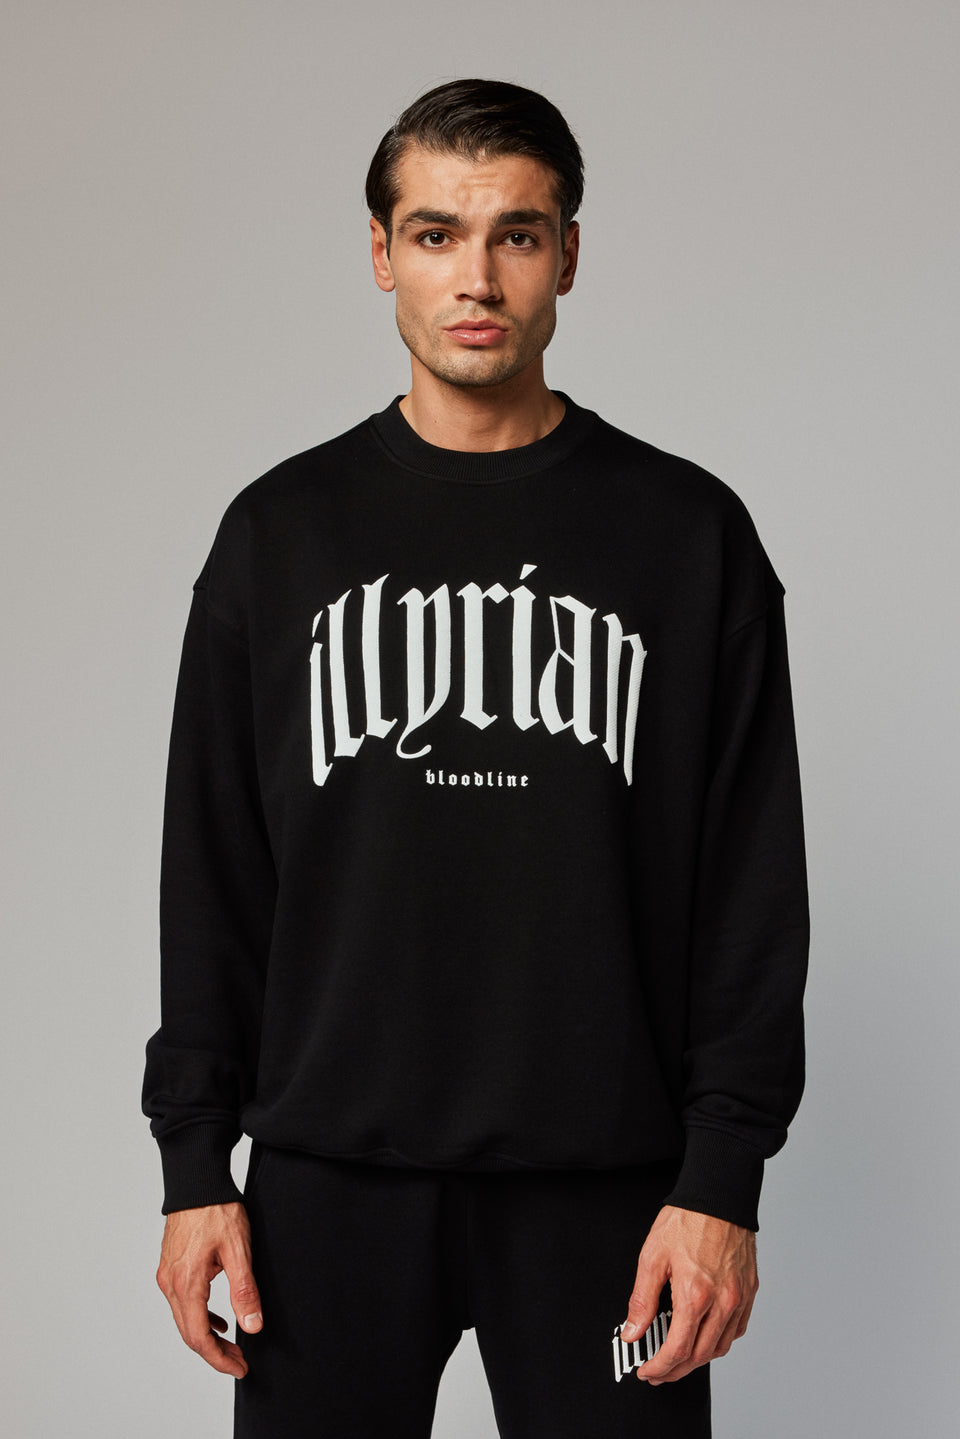 Illyrian Classical Sweater - Black